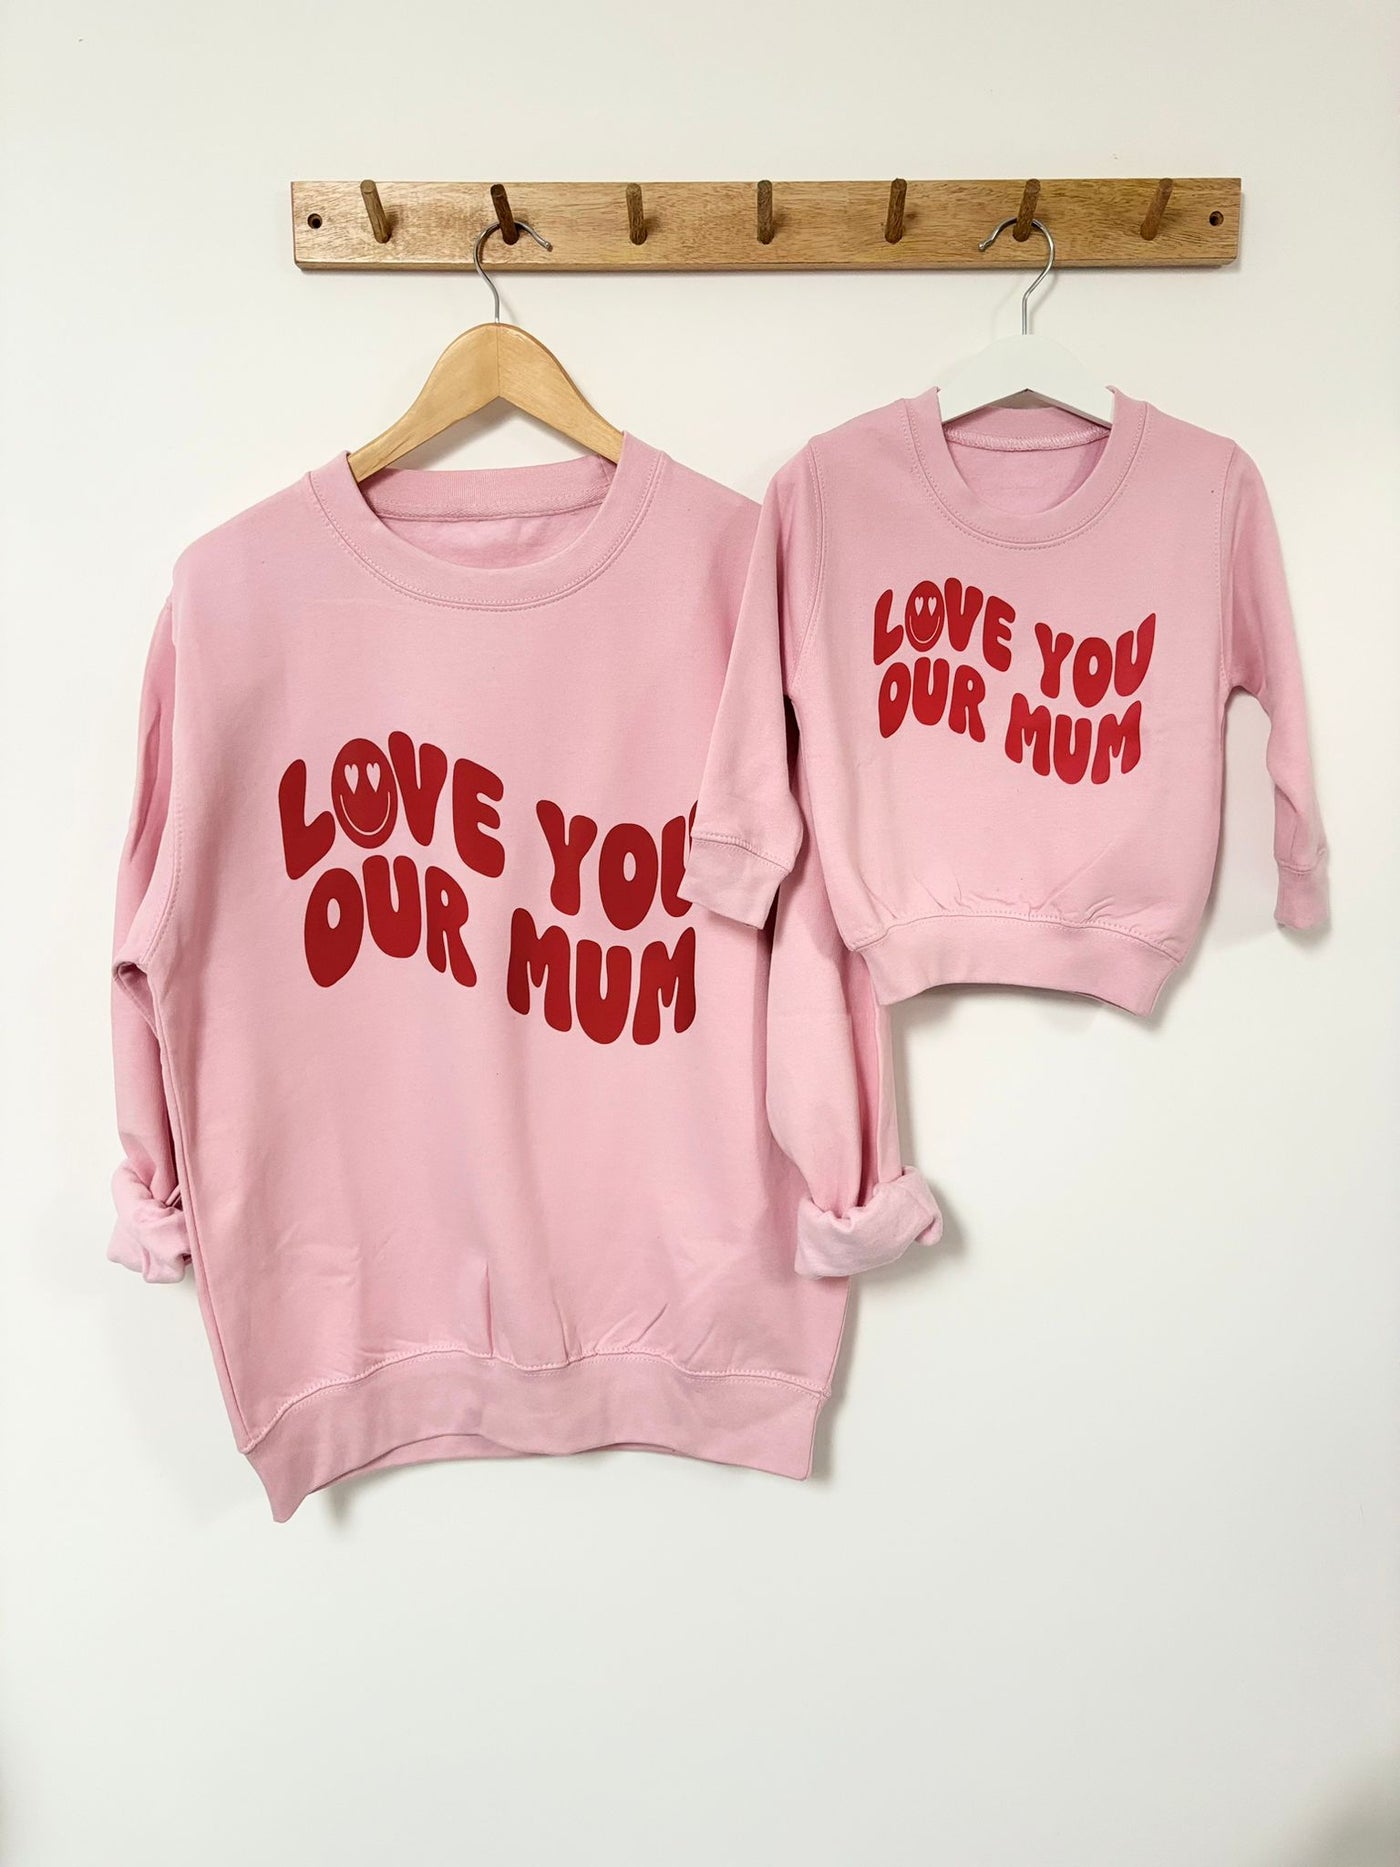 Our Albie ‘Love You Our Mum’ oversized sweatshirt for adults in pink cherry